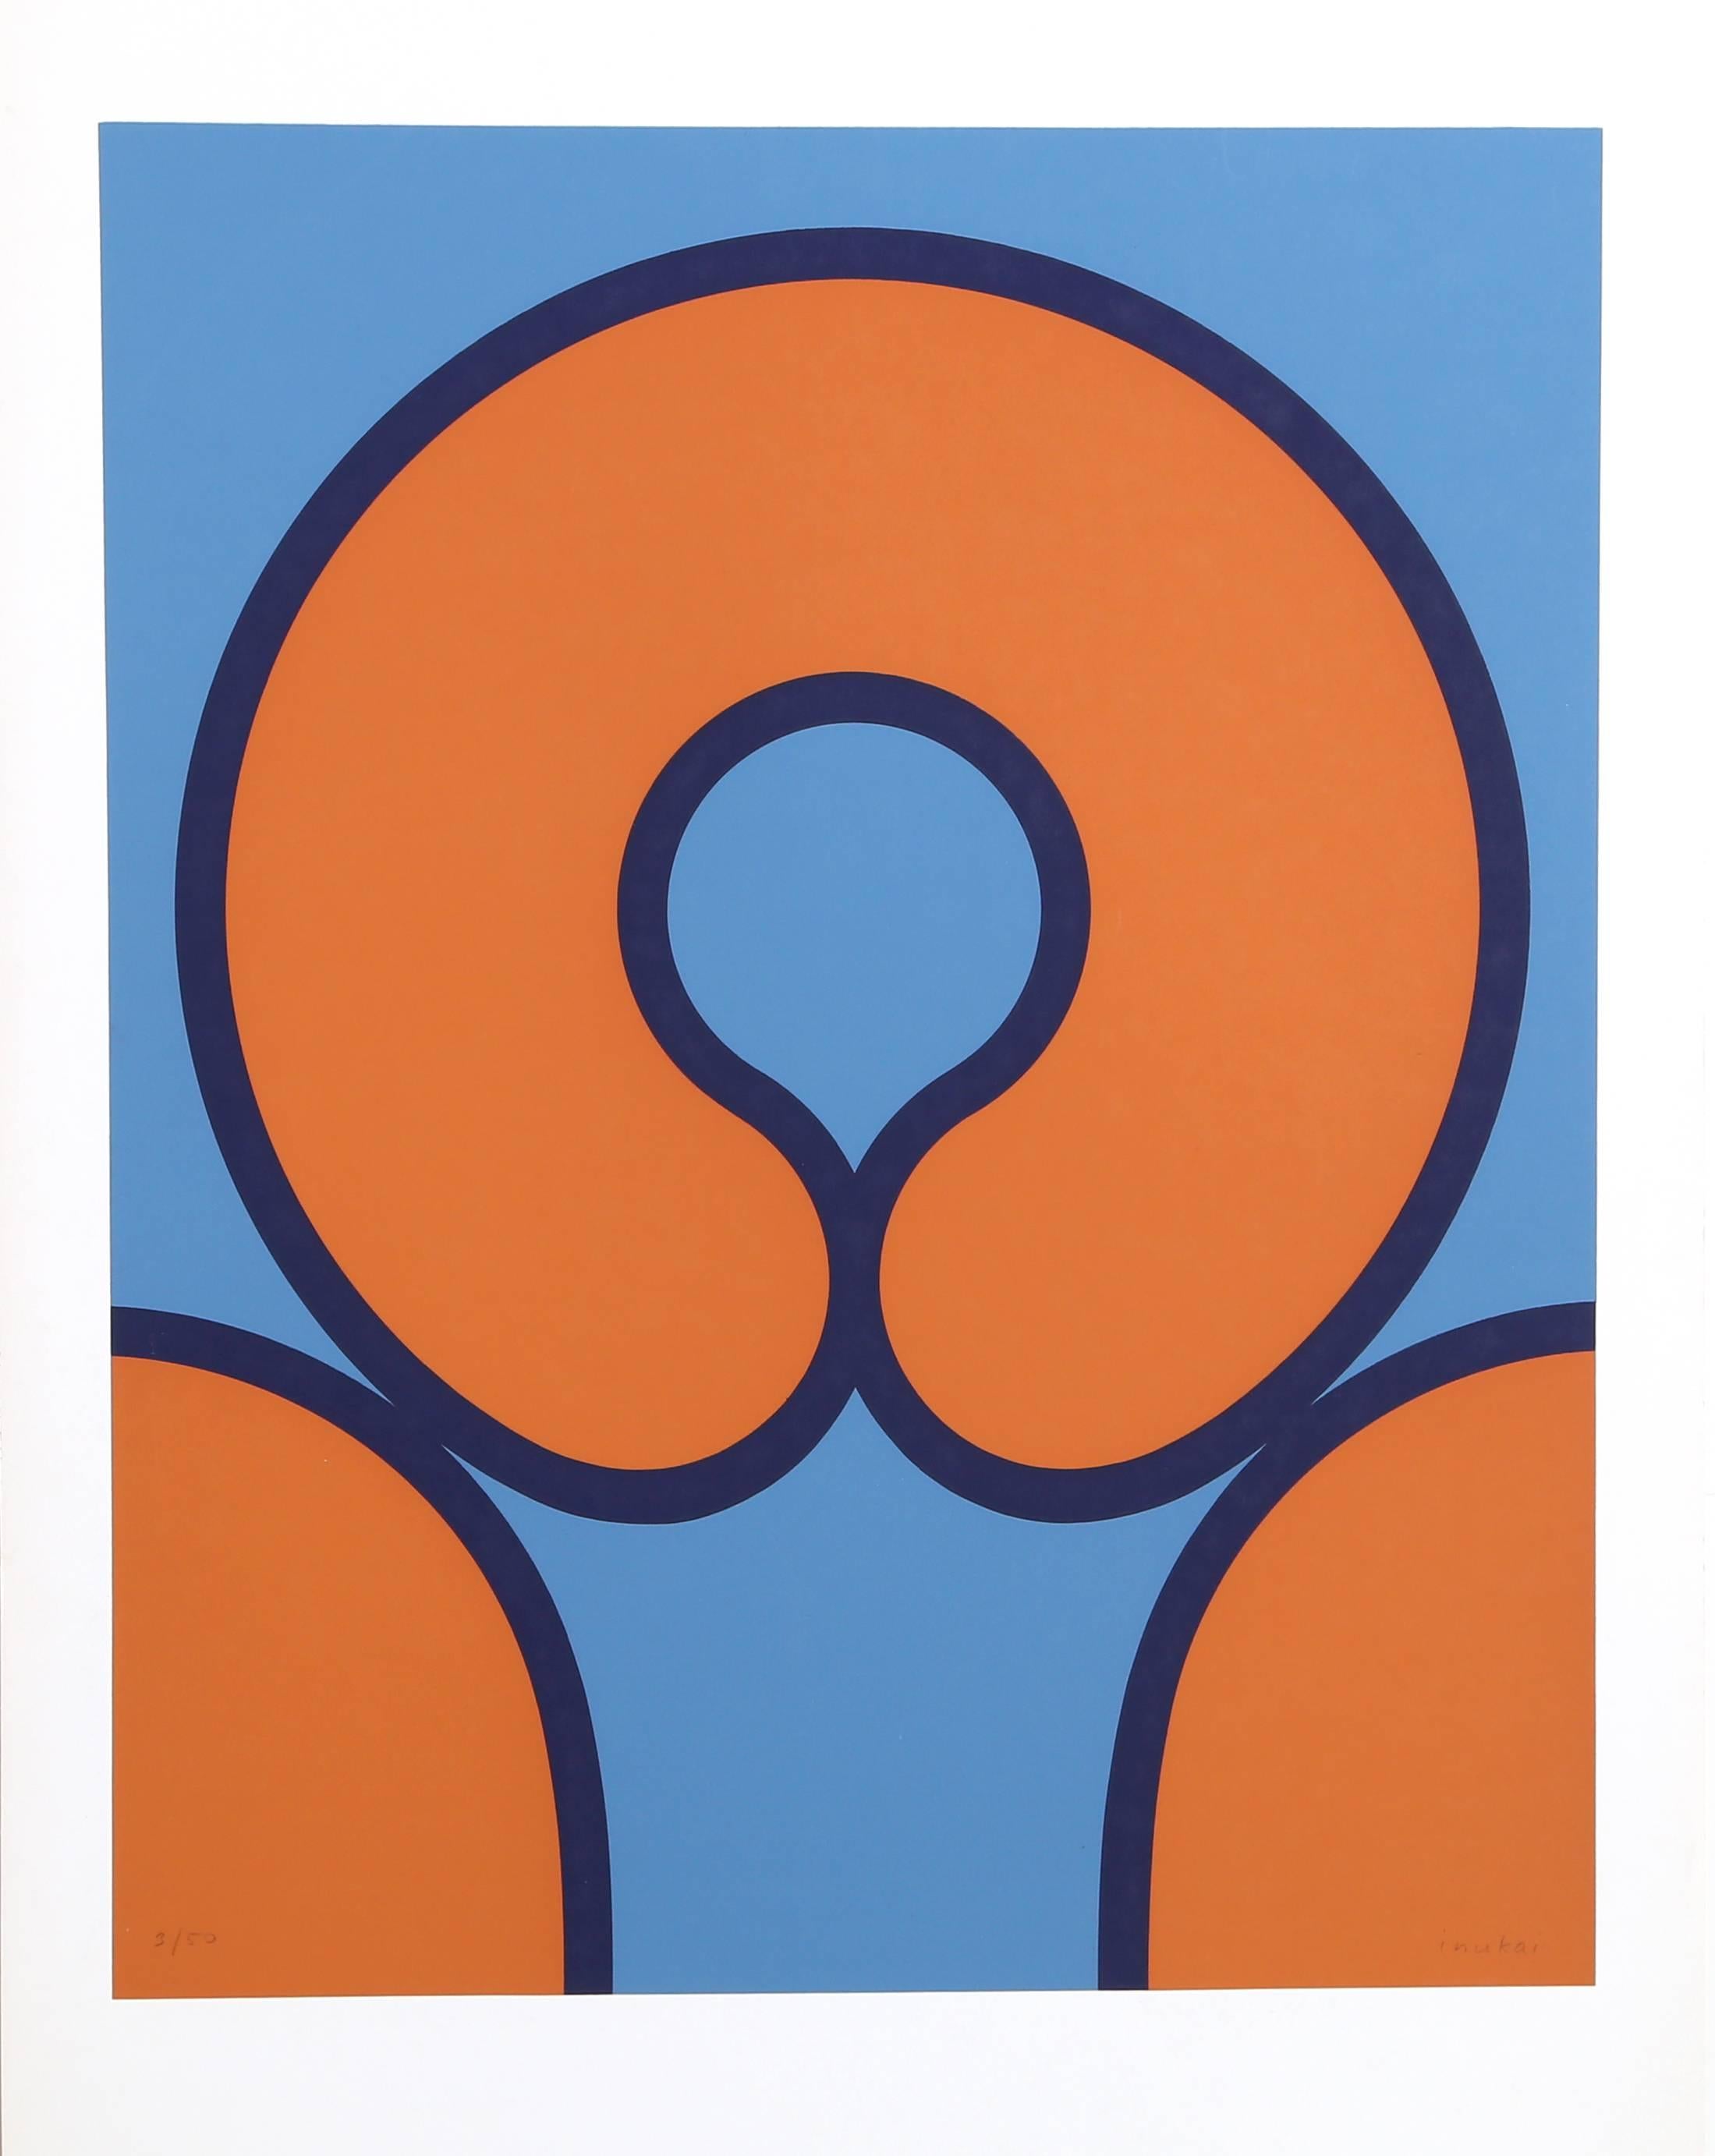 Artist: Kyohei Inukai, American (1913 - 1985)
Title: Egg (Orange)
Year: circa 1970
Medium: Silkscreen, signed and numbered in pencil
Edition: 50
Image Size: 25 x 20 inches
Size: 35 x 23 in. (88.9 x 58.42 cm)